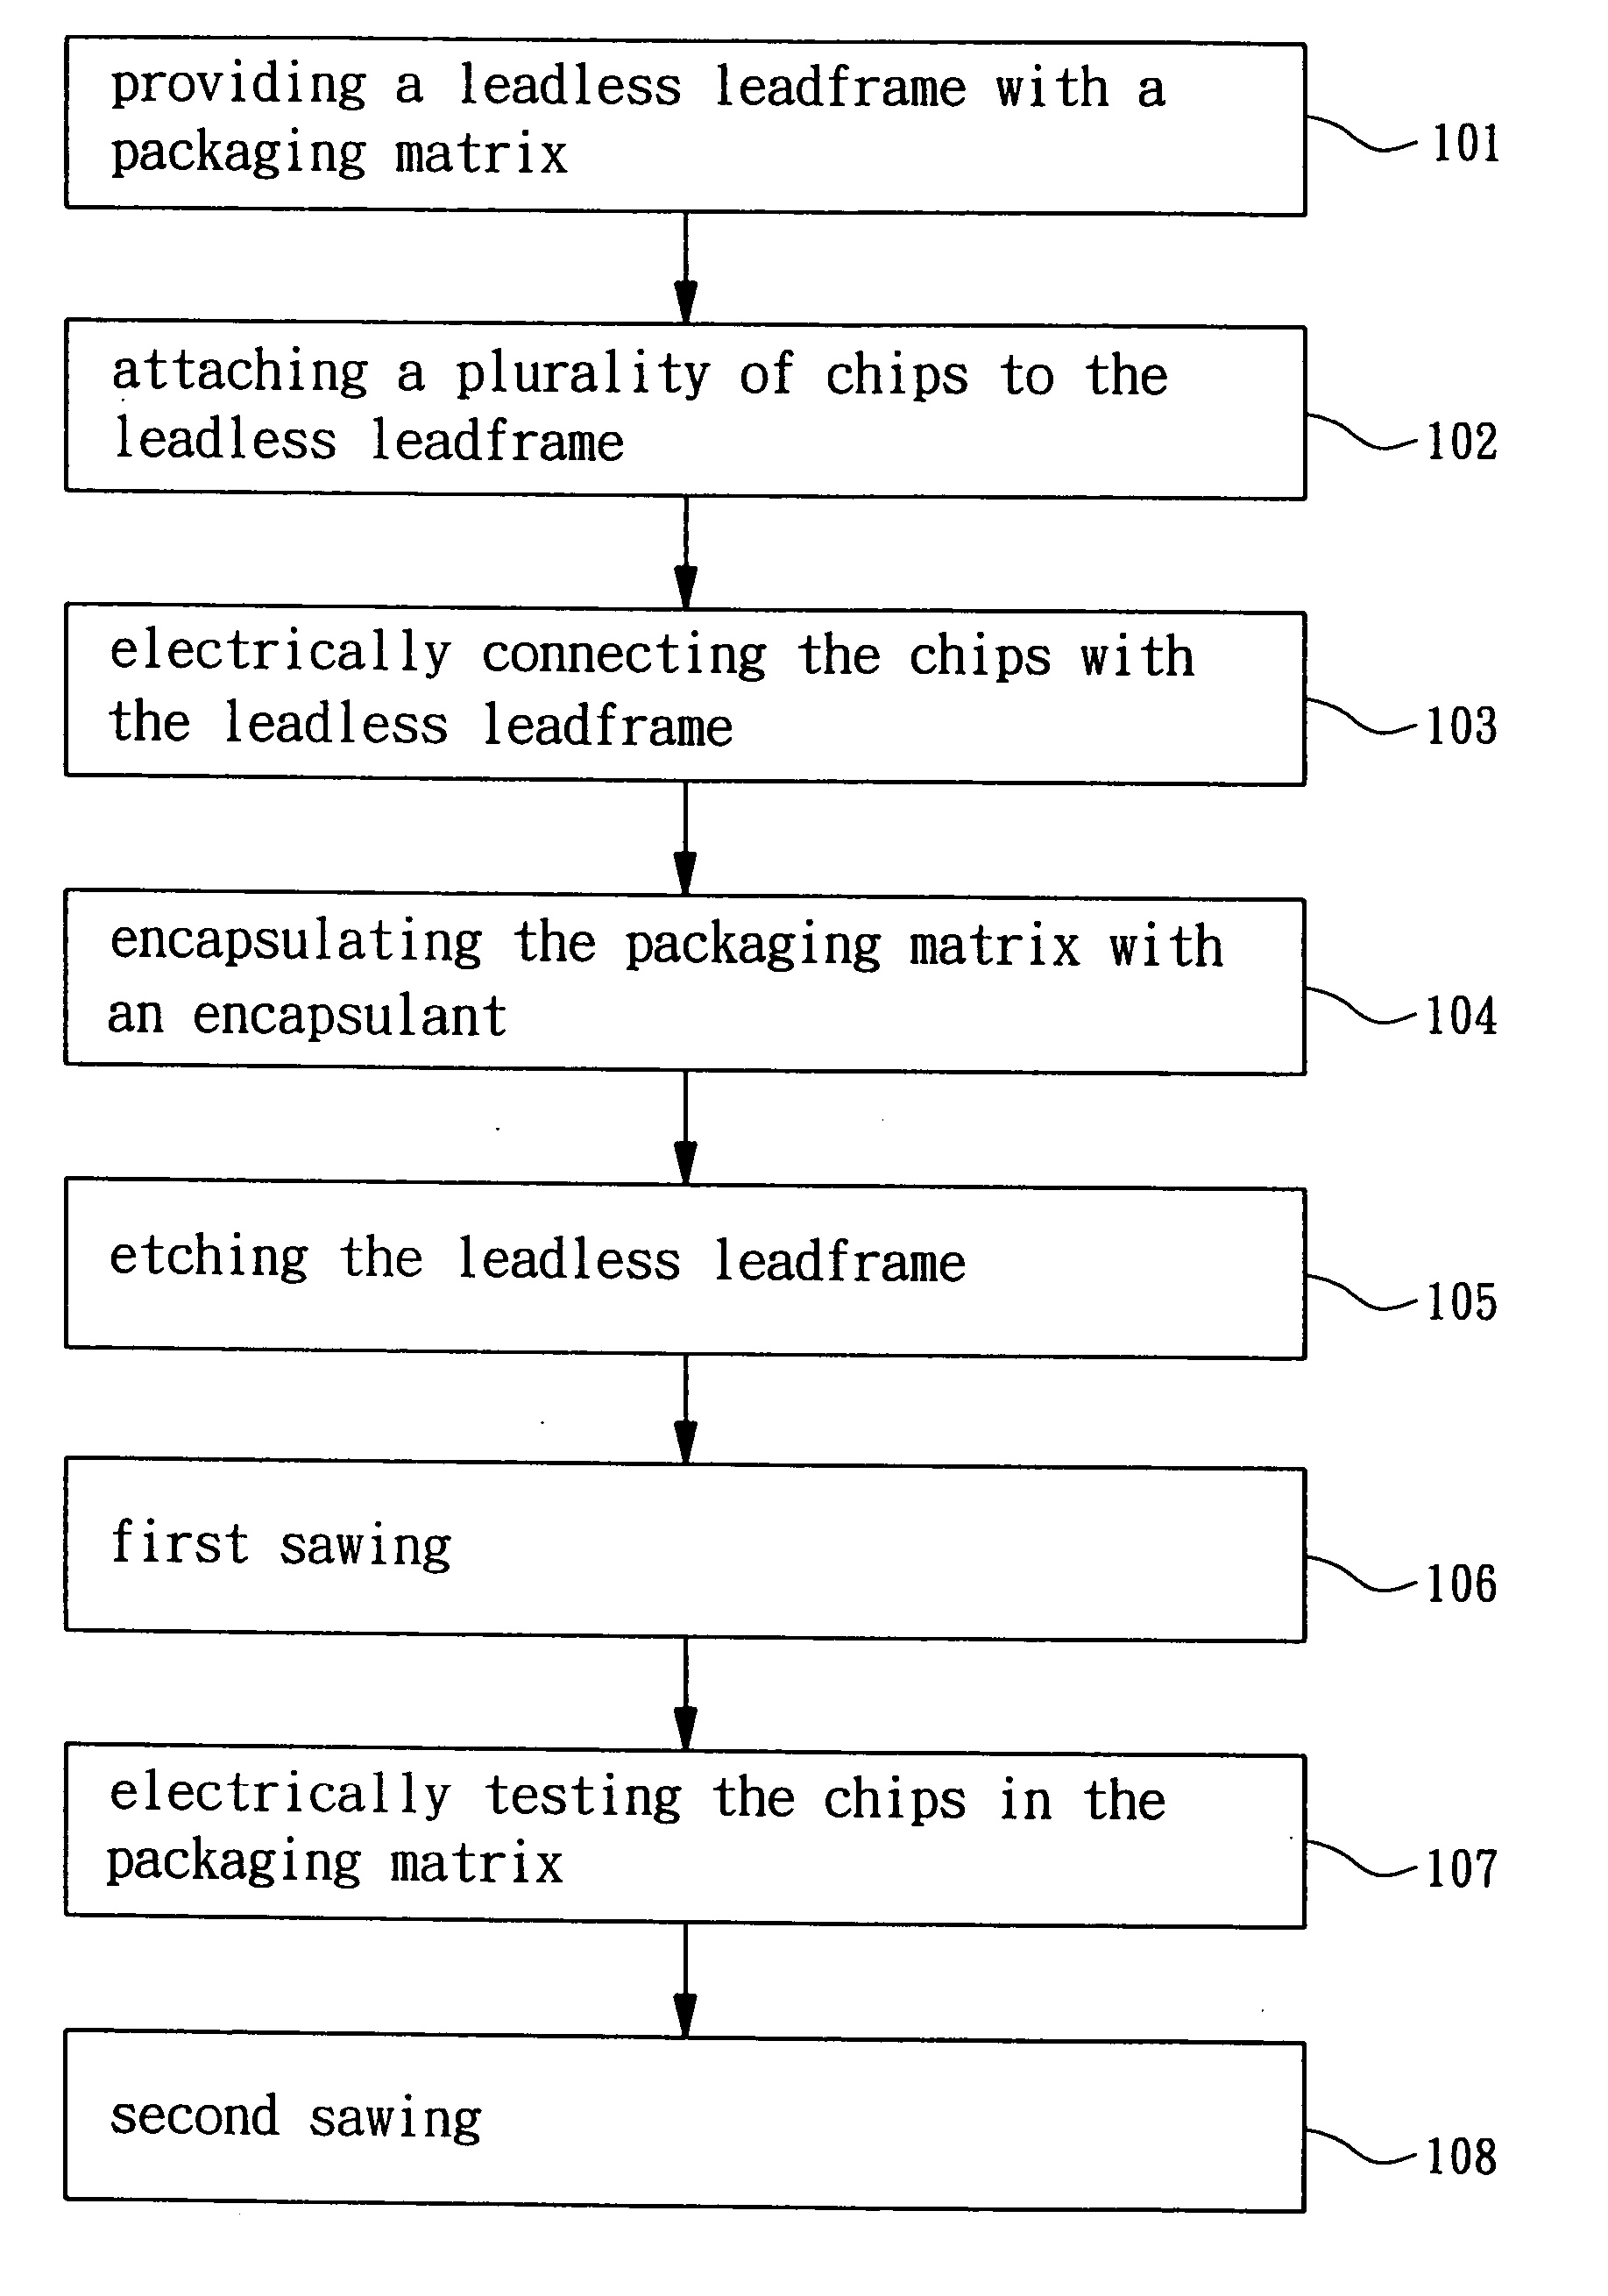 Process for manufacturing leadless semiconductor packages including an electrical test in a matrix of a leadless leadframe